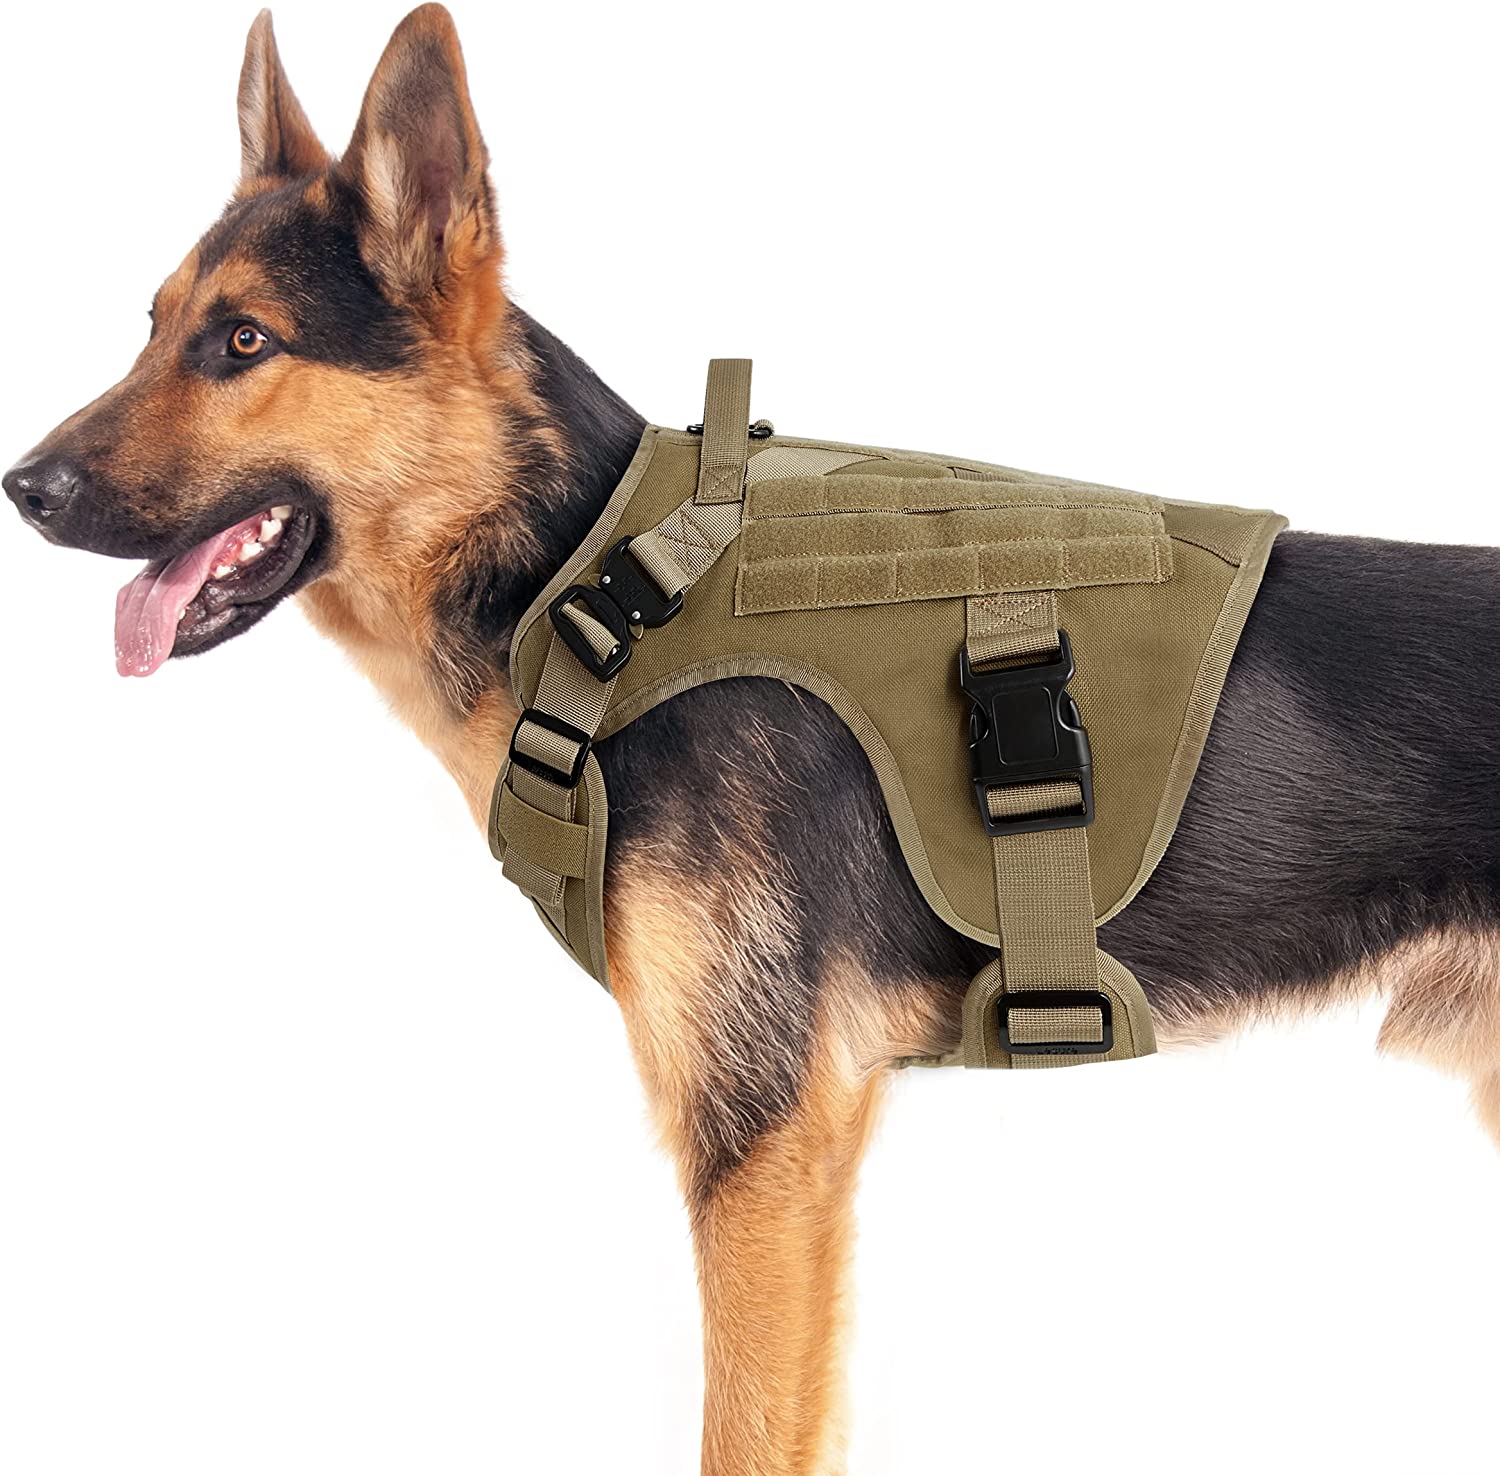 Lesure Tactical Dog Harness Available in Large Medium Small & XL Dogs $12.99